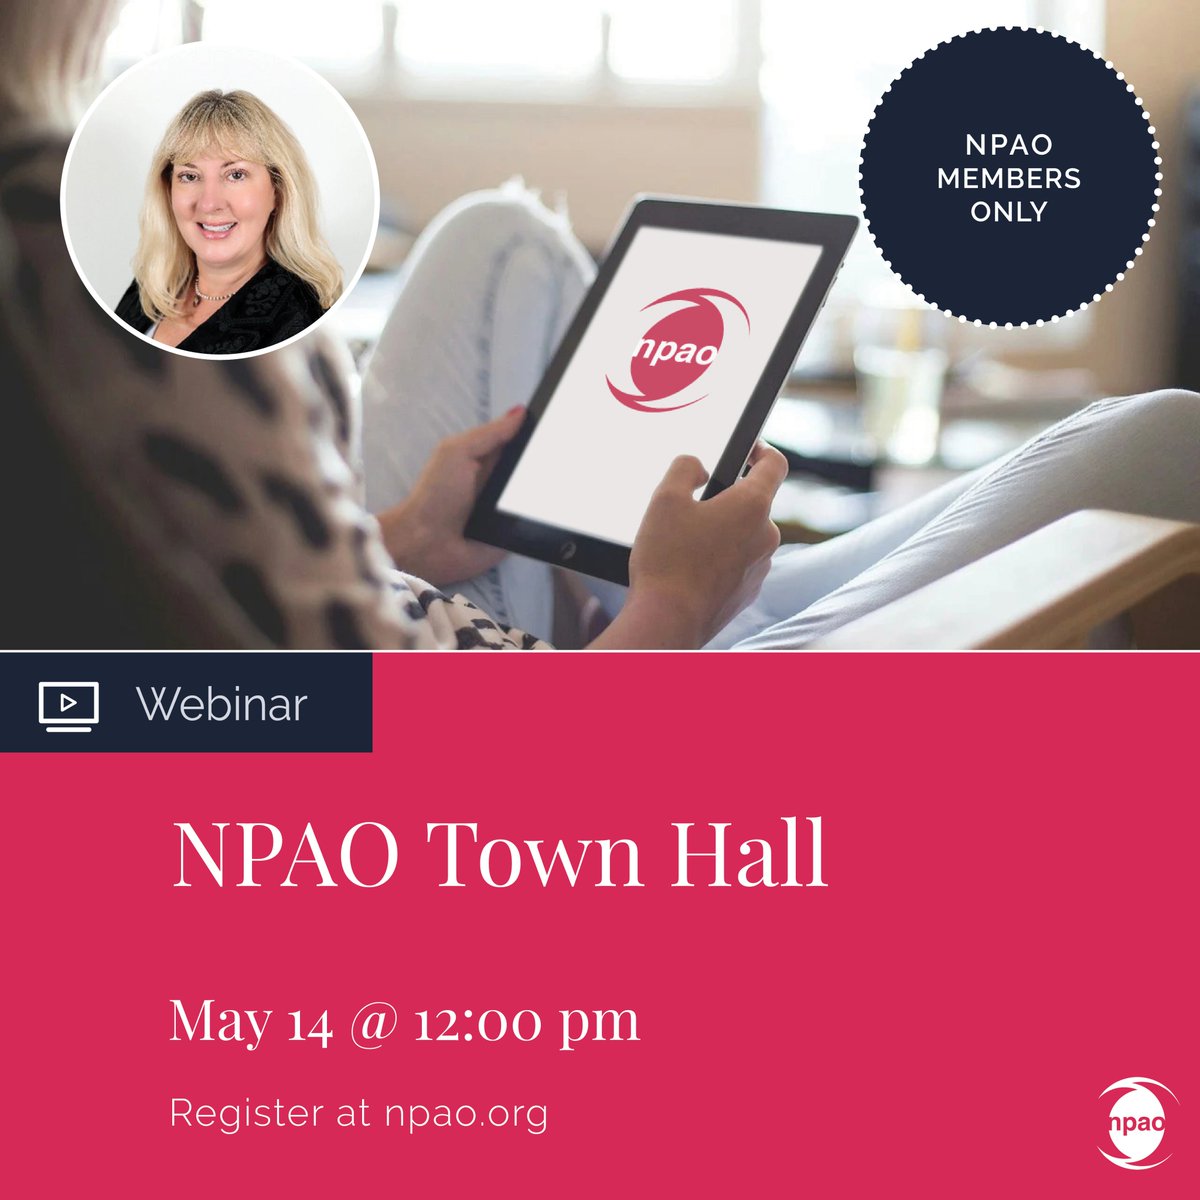 Calling all NPAO members! Join us for our Town Hall on May 14 from 12:00 pm-1:00 pm. Your input is invaluable as we discuss pressing issues, advocate for NP visibility, & shape the future of our profession. Don't miss this chance to make your voice heard: npao.org/calendar-of-ev…!